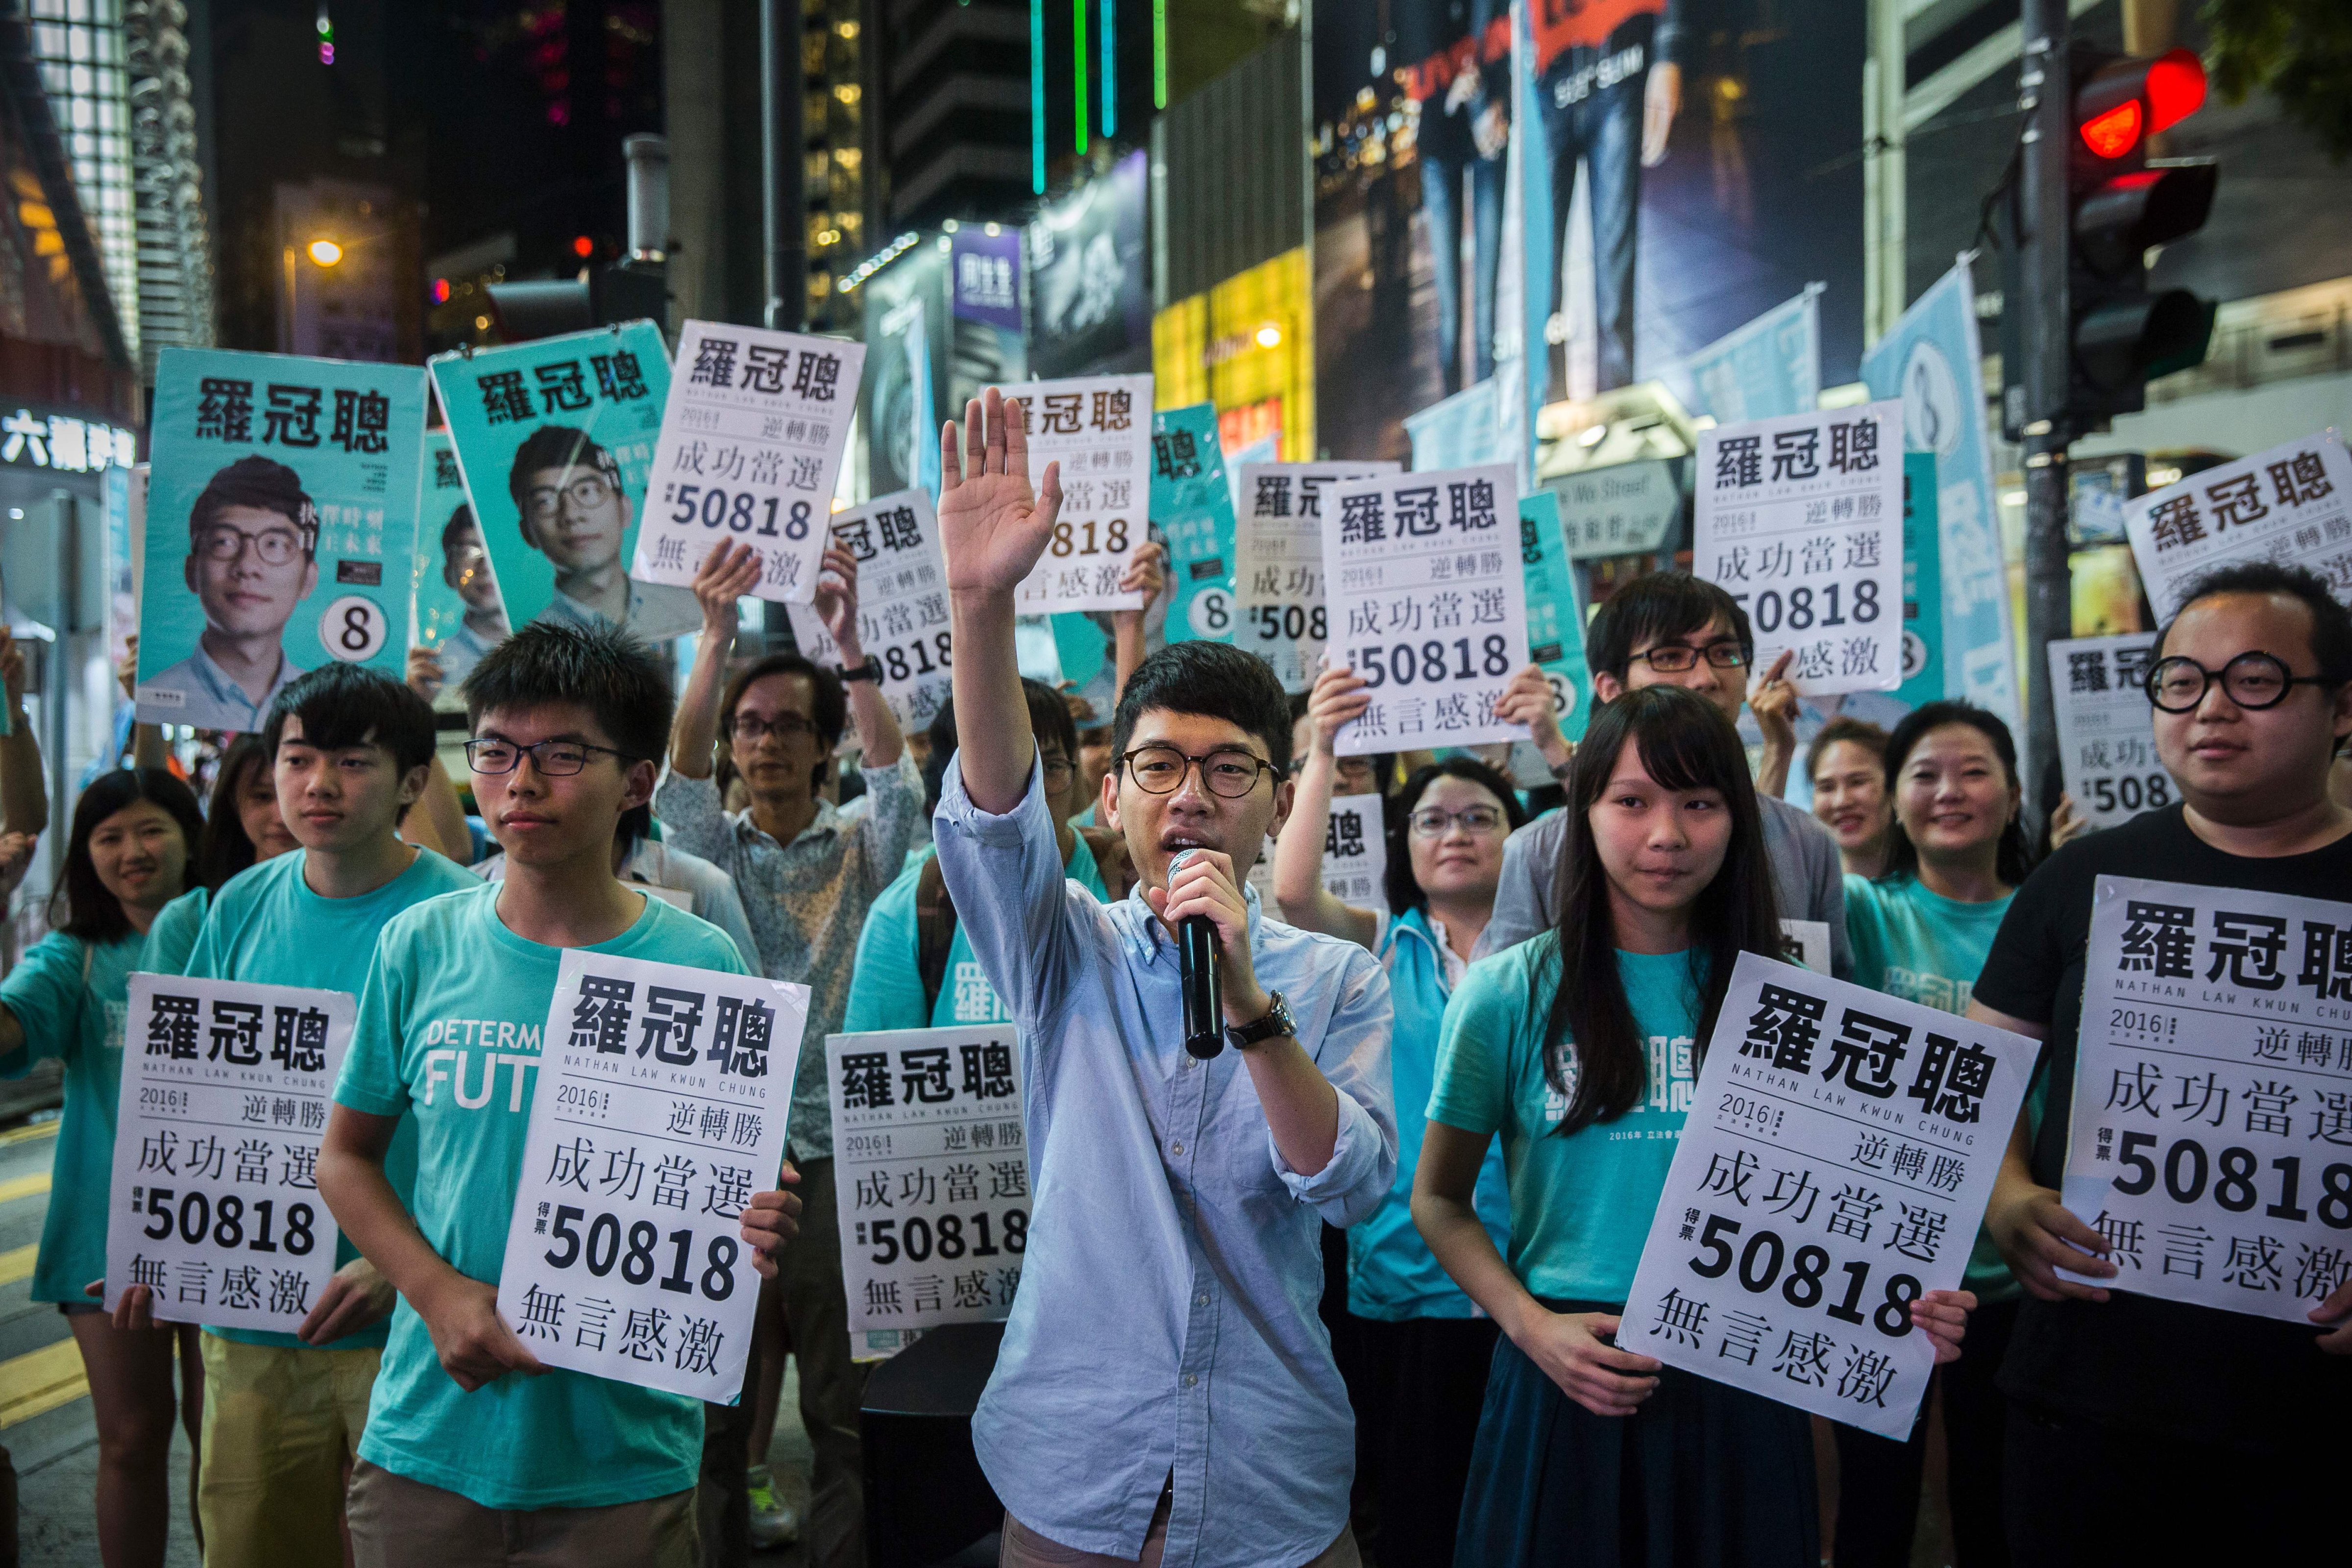 Nathan Law, center, speaks at a rally with Joshua Wong, center left, and other supporters in Causeway Bay, Hong Kong, following Law's win in the Legislative Council election on Sept. 5, 2016. A new generation of young Hong Kong politicians advocating a break from Beijing looked set to become lawmakers for the first time on Sept. 5 in the biggest poll since mass pro-democracy rallies in 2014 (Isaac Lawrence—AFP/Getty Images)